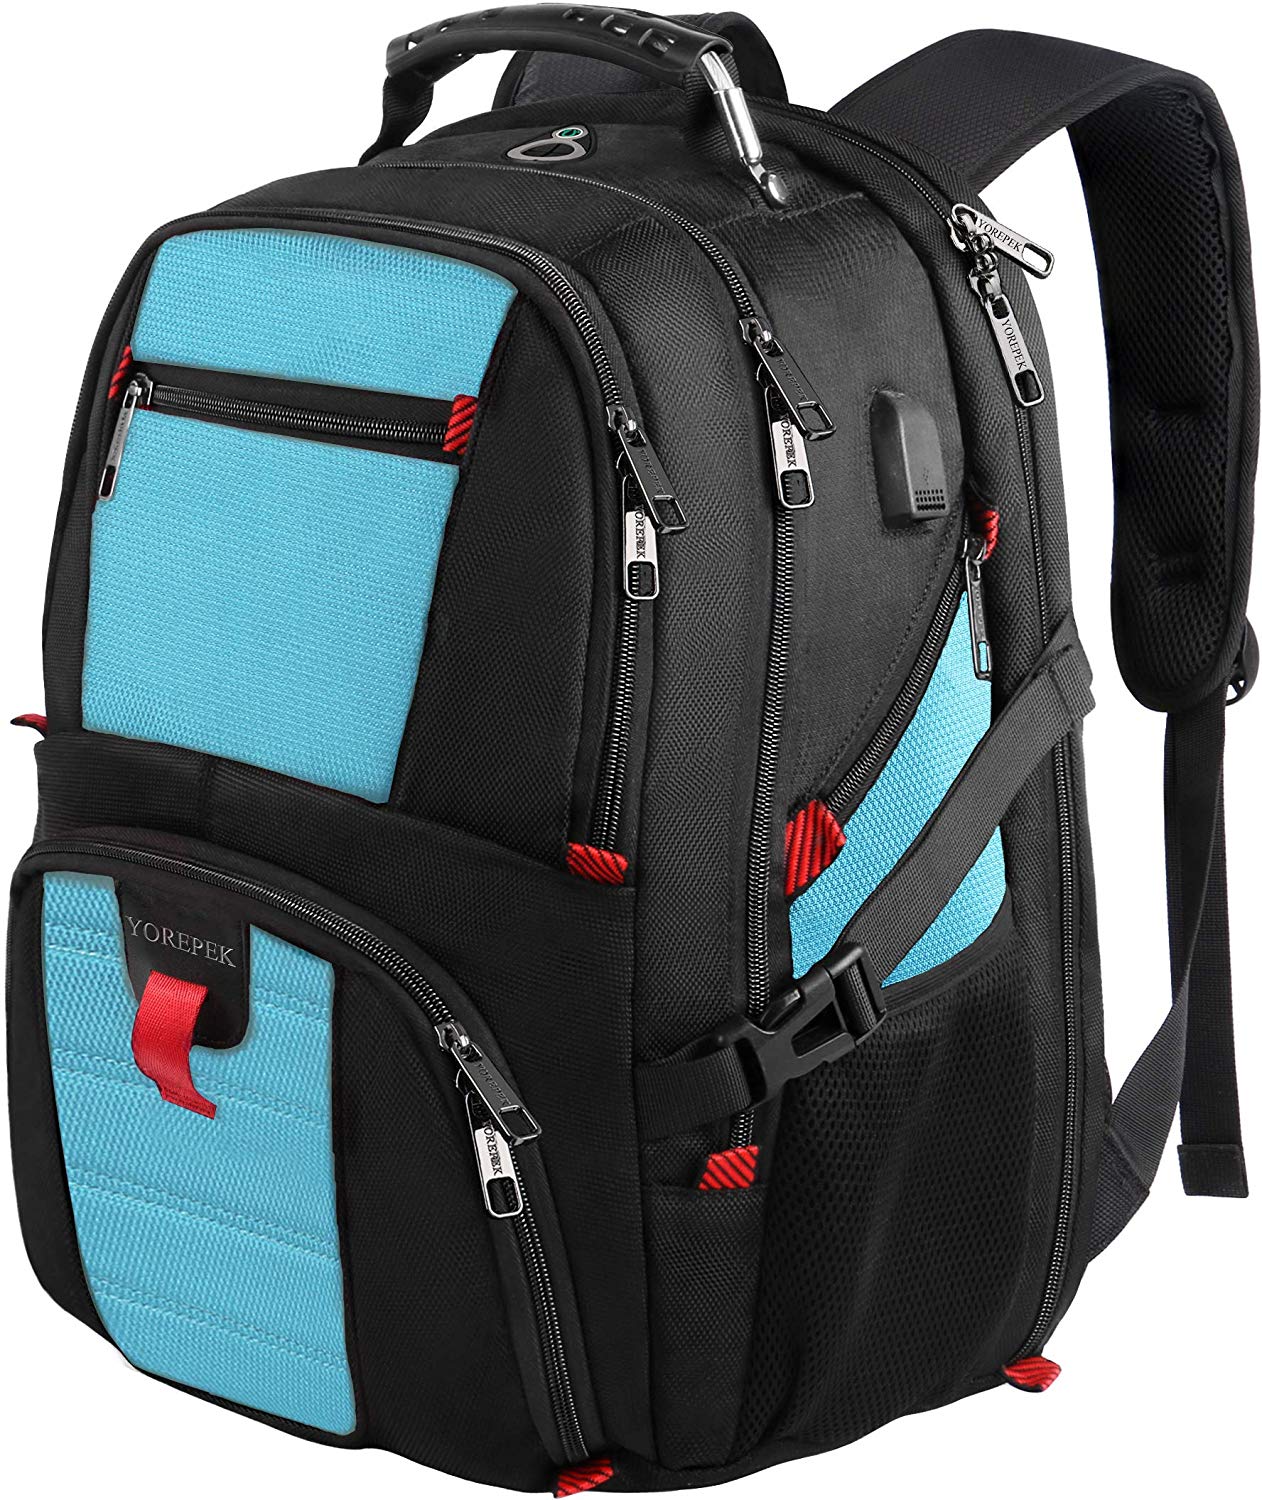 Top 10 Best Backpacks For Nursing Students Reviews - Brand Review